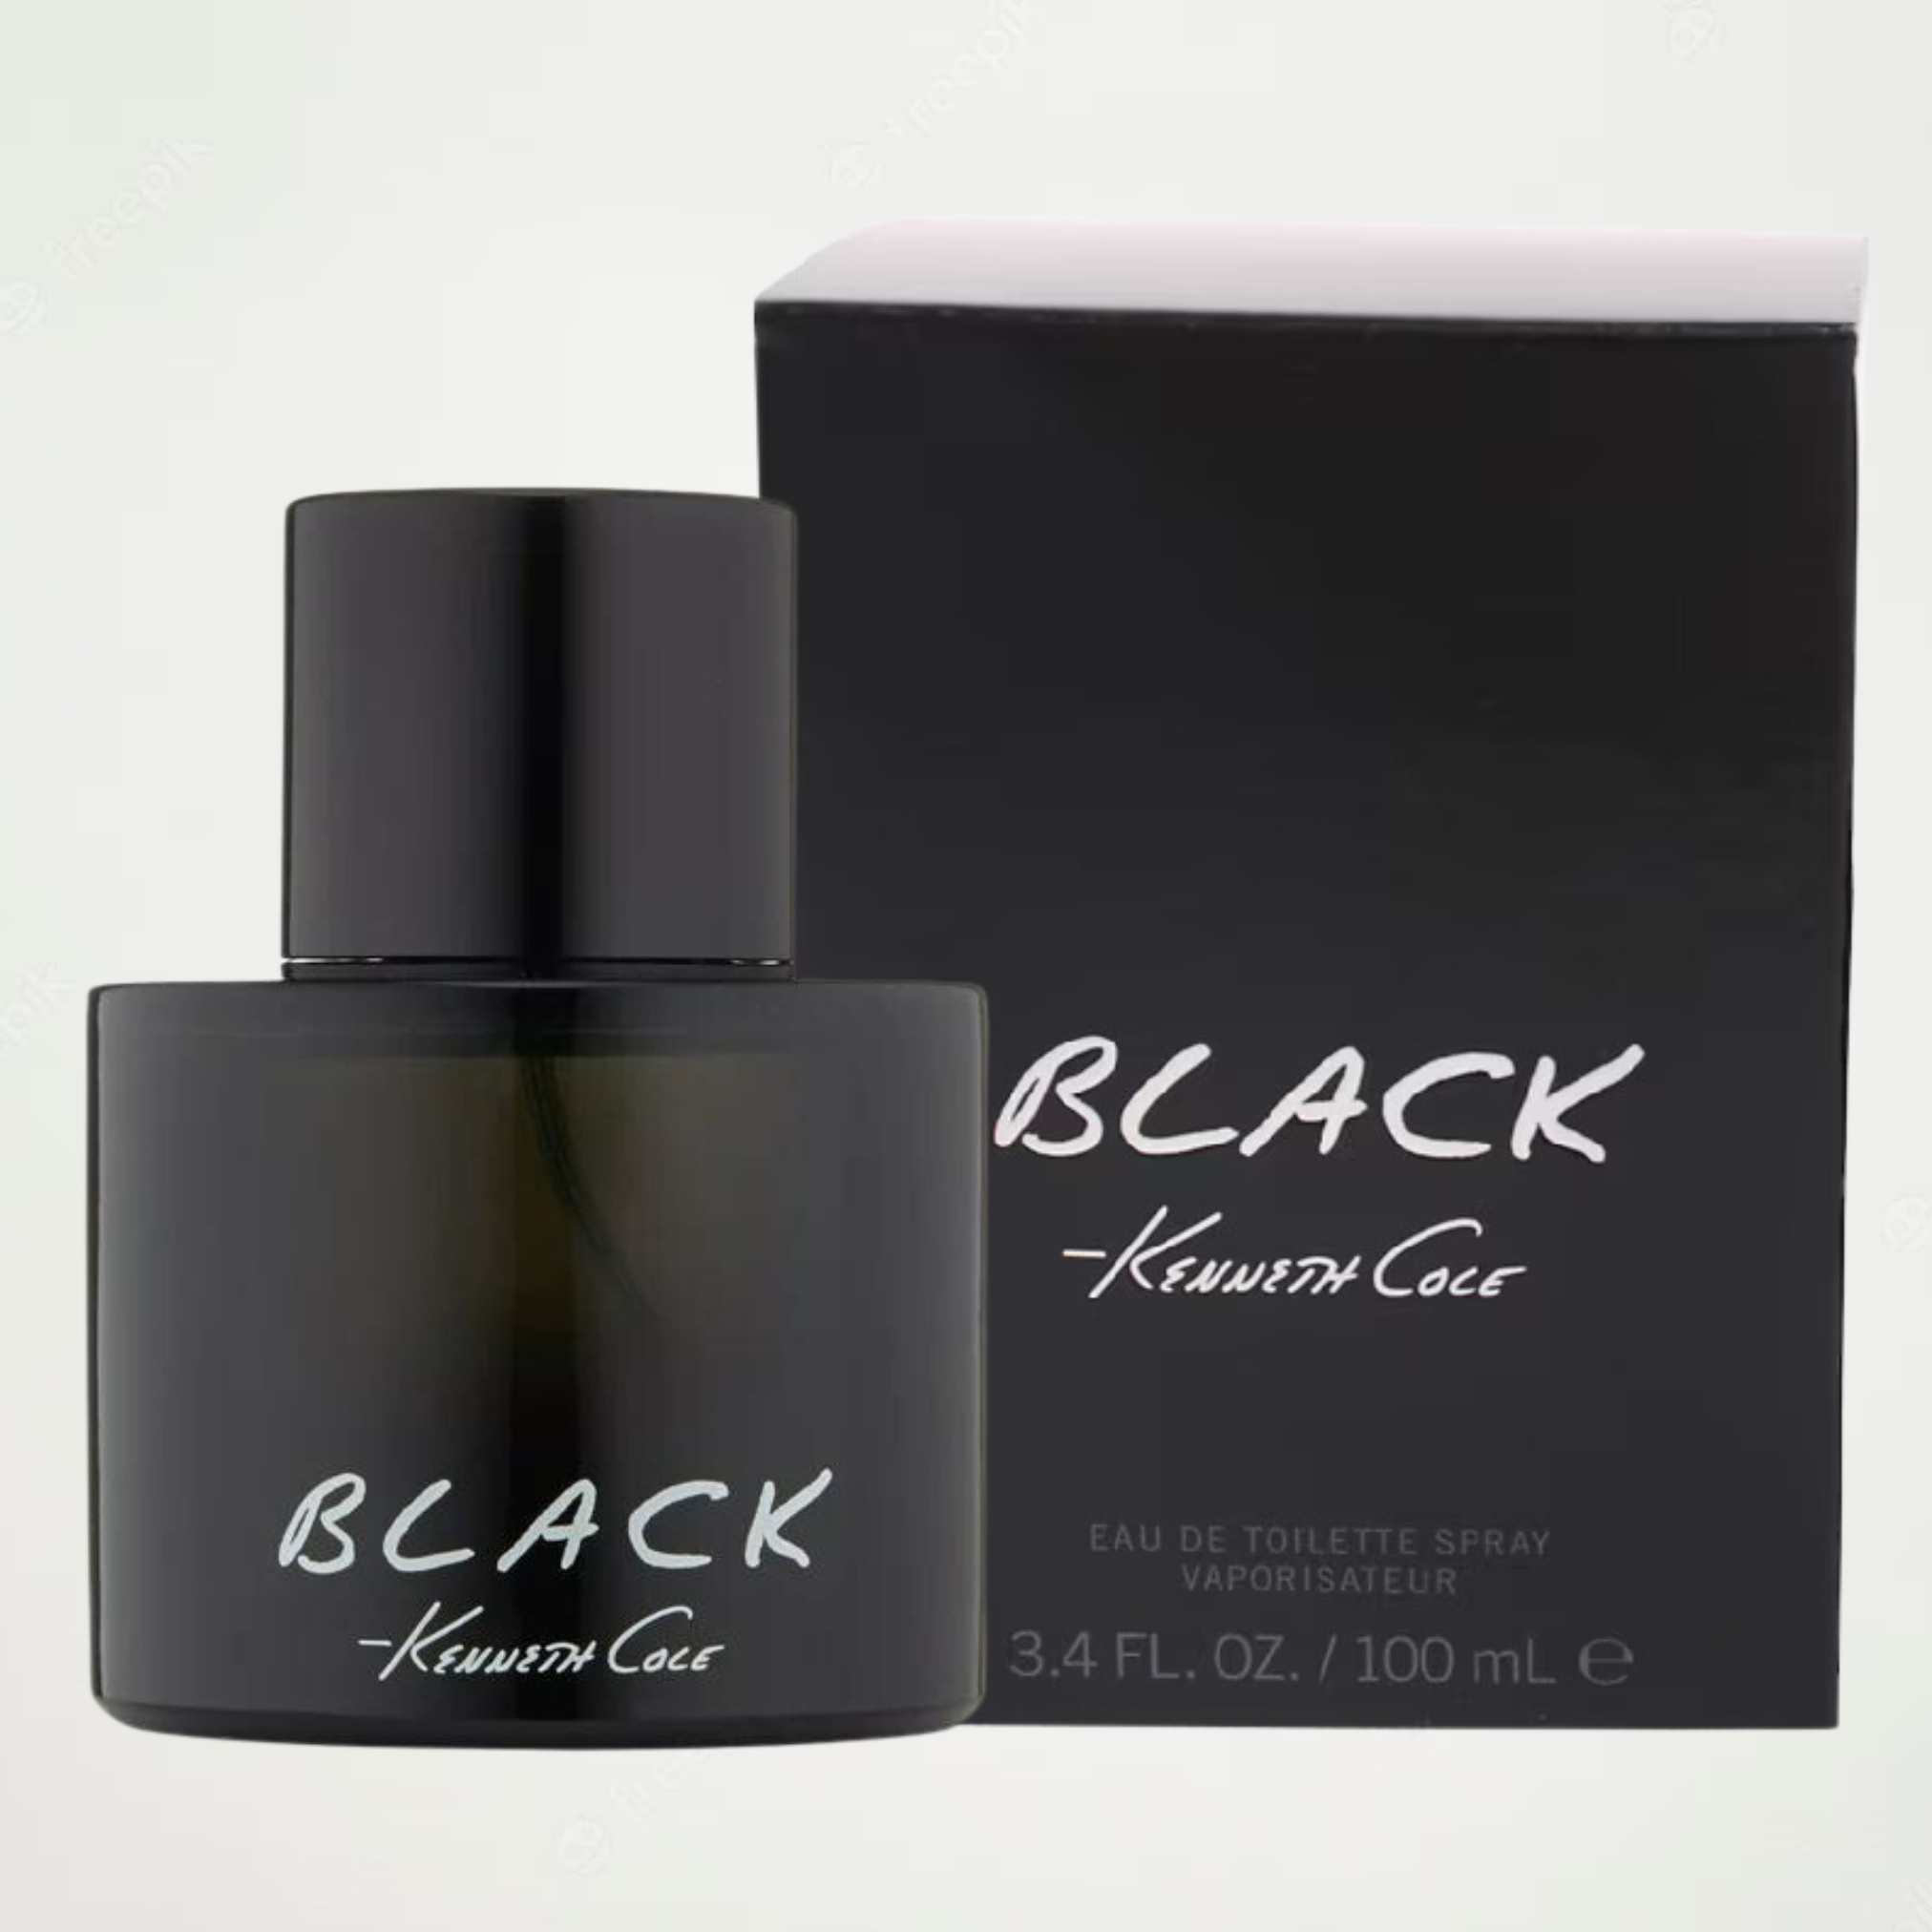 Kenneth Cole Black (EDT)